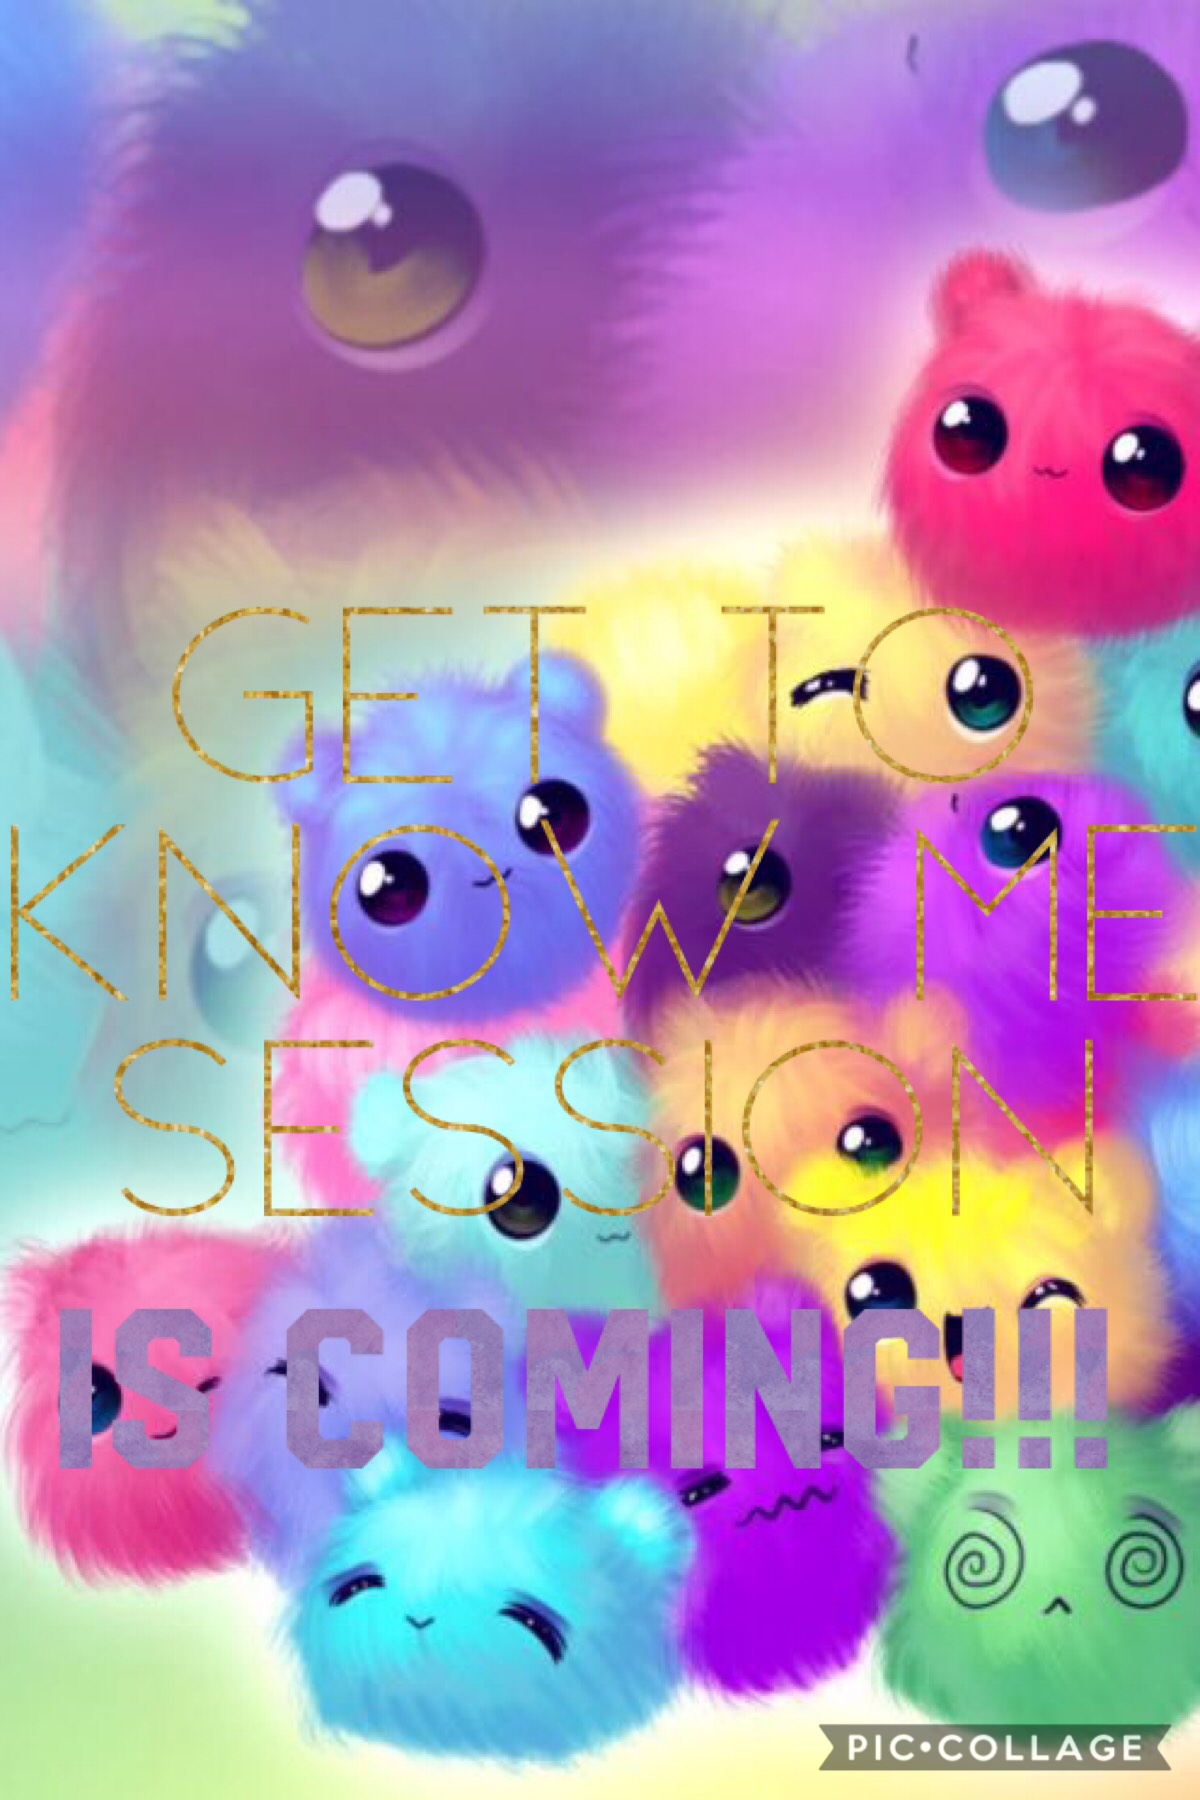 Guys Get to know me session is coming, Get to 270 followers by next week for more information!!!